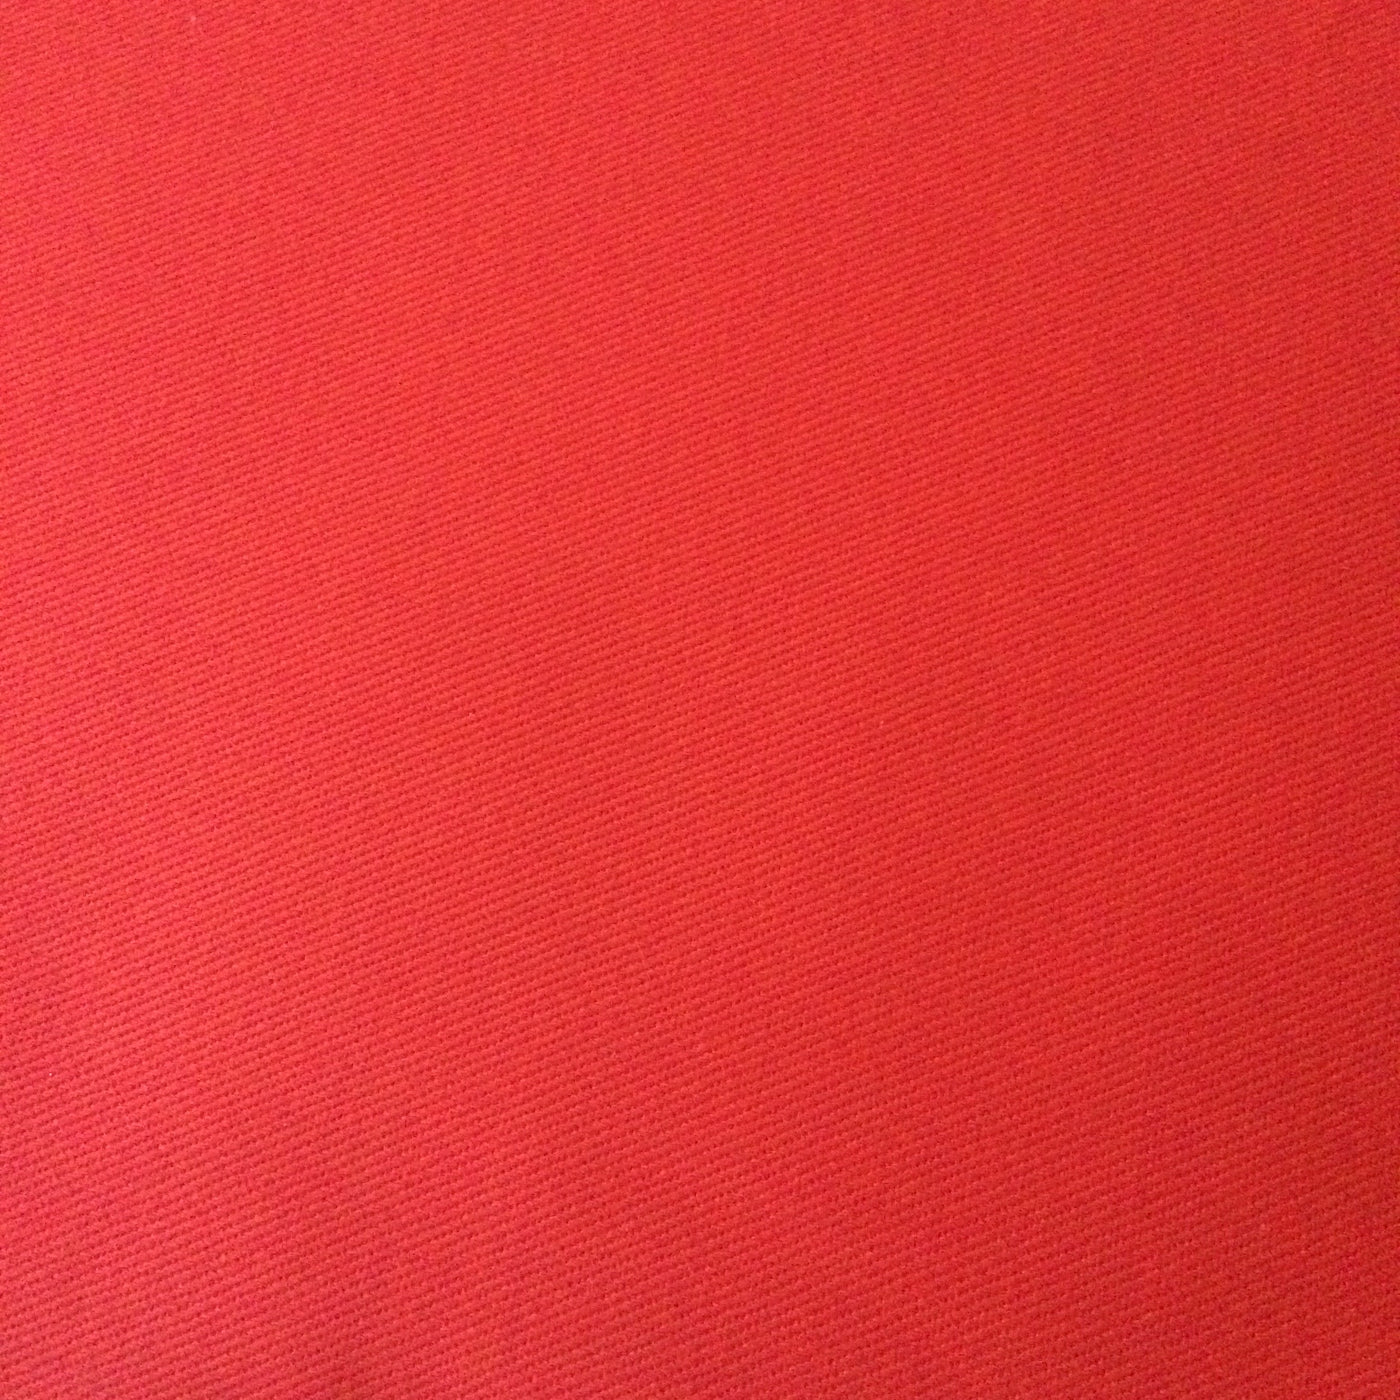 Red cotton drill fabric